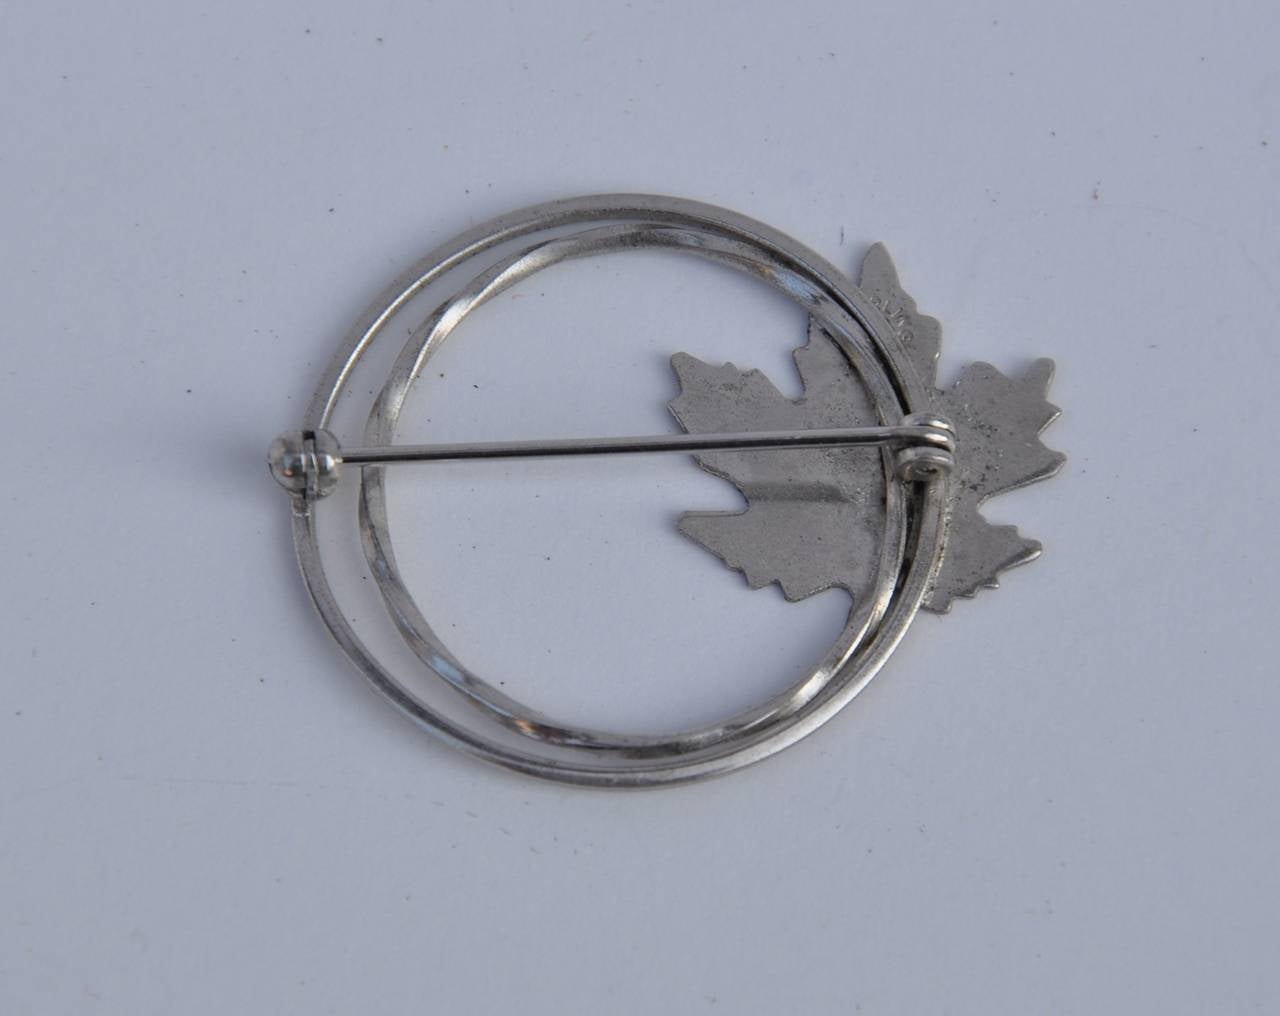 This sweet circular silver hardware "Leaf" brooch has detailed etching and measures 1 1/8" in height and 1 1/2" in width. The depth measures 2/8".